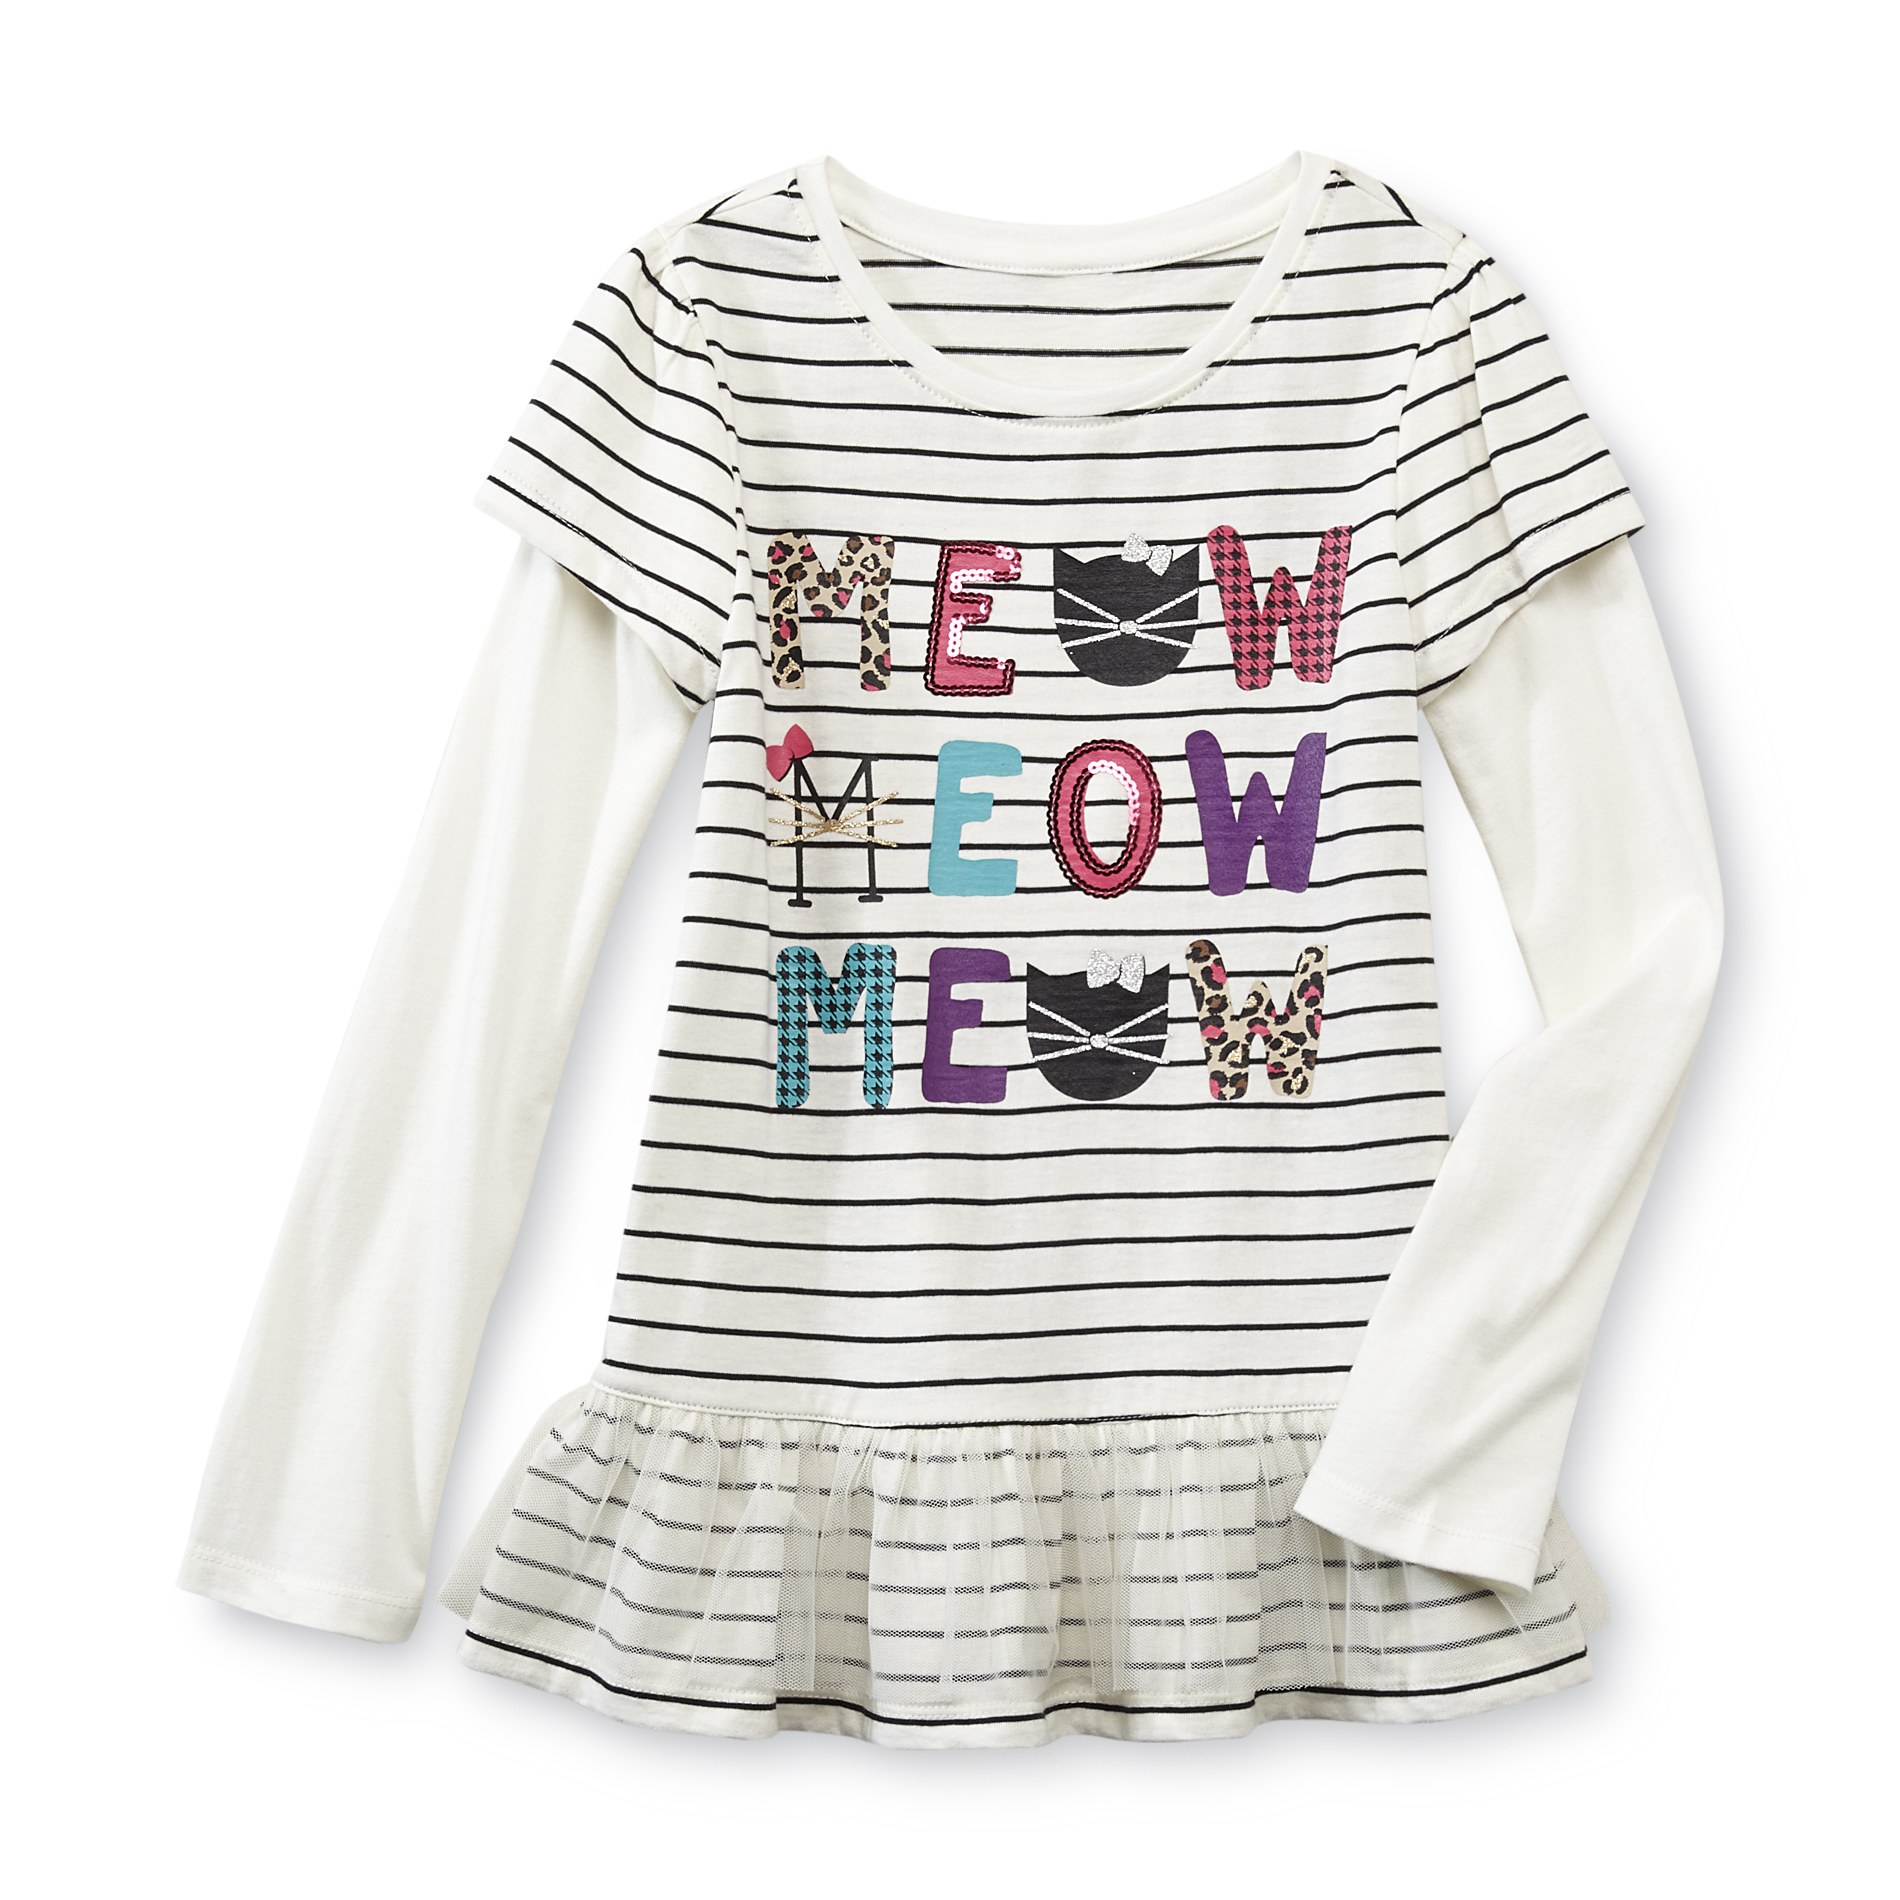 Toughskins Girl's Graphic Tunic Top - Cats & Stripes